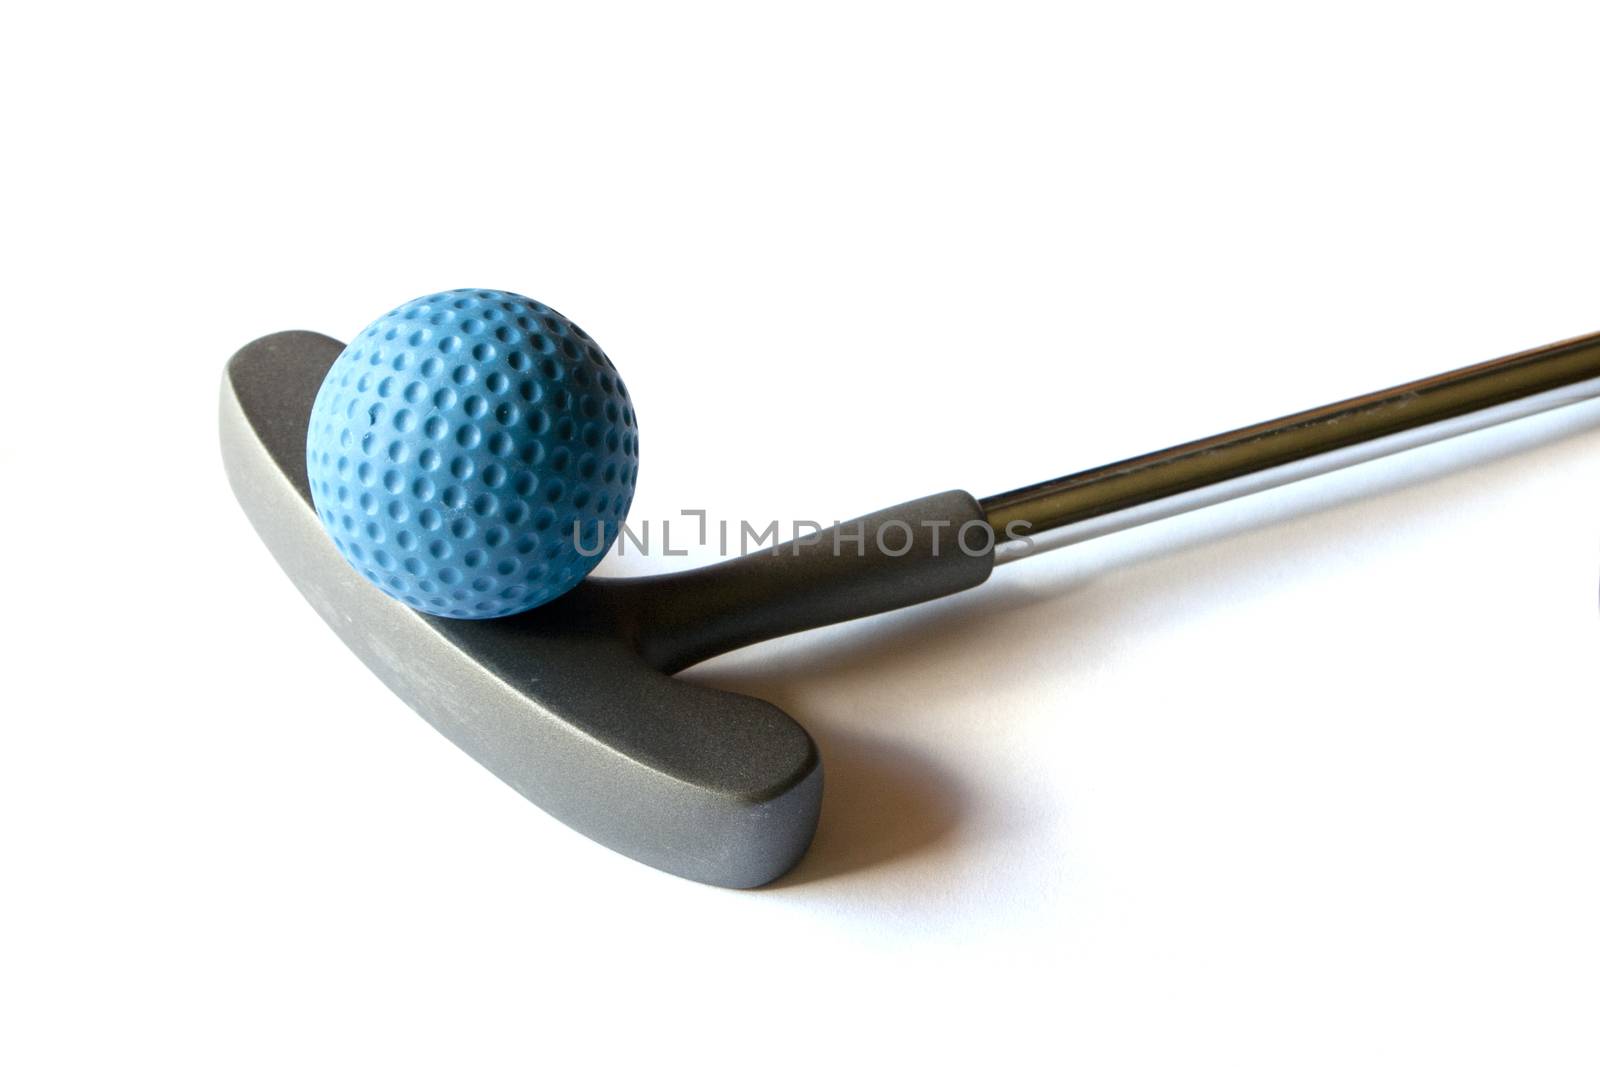 Mini Golf Stick with blue colored ball on an isolated background